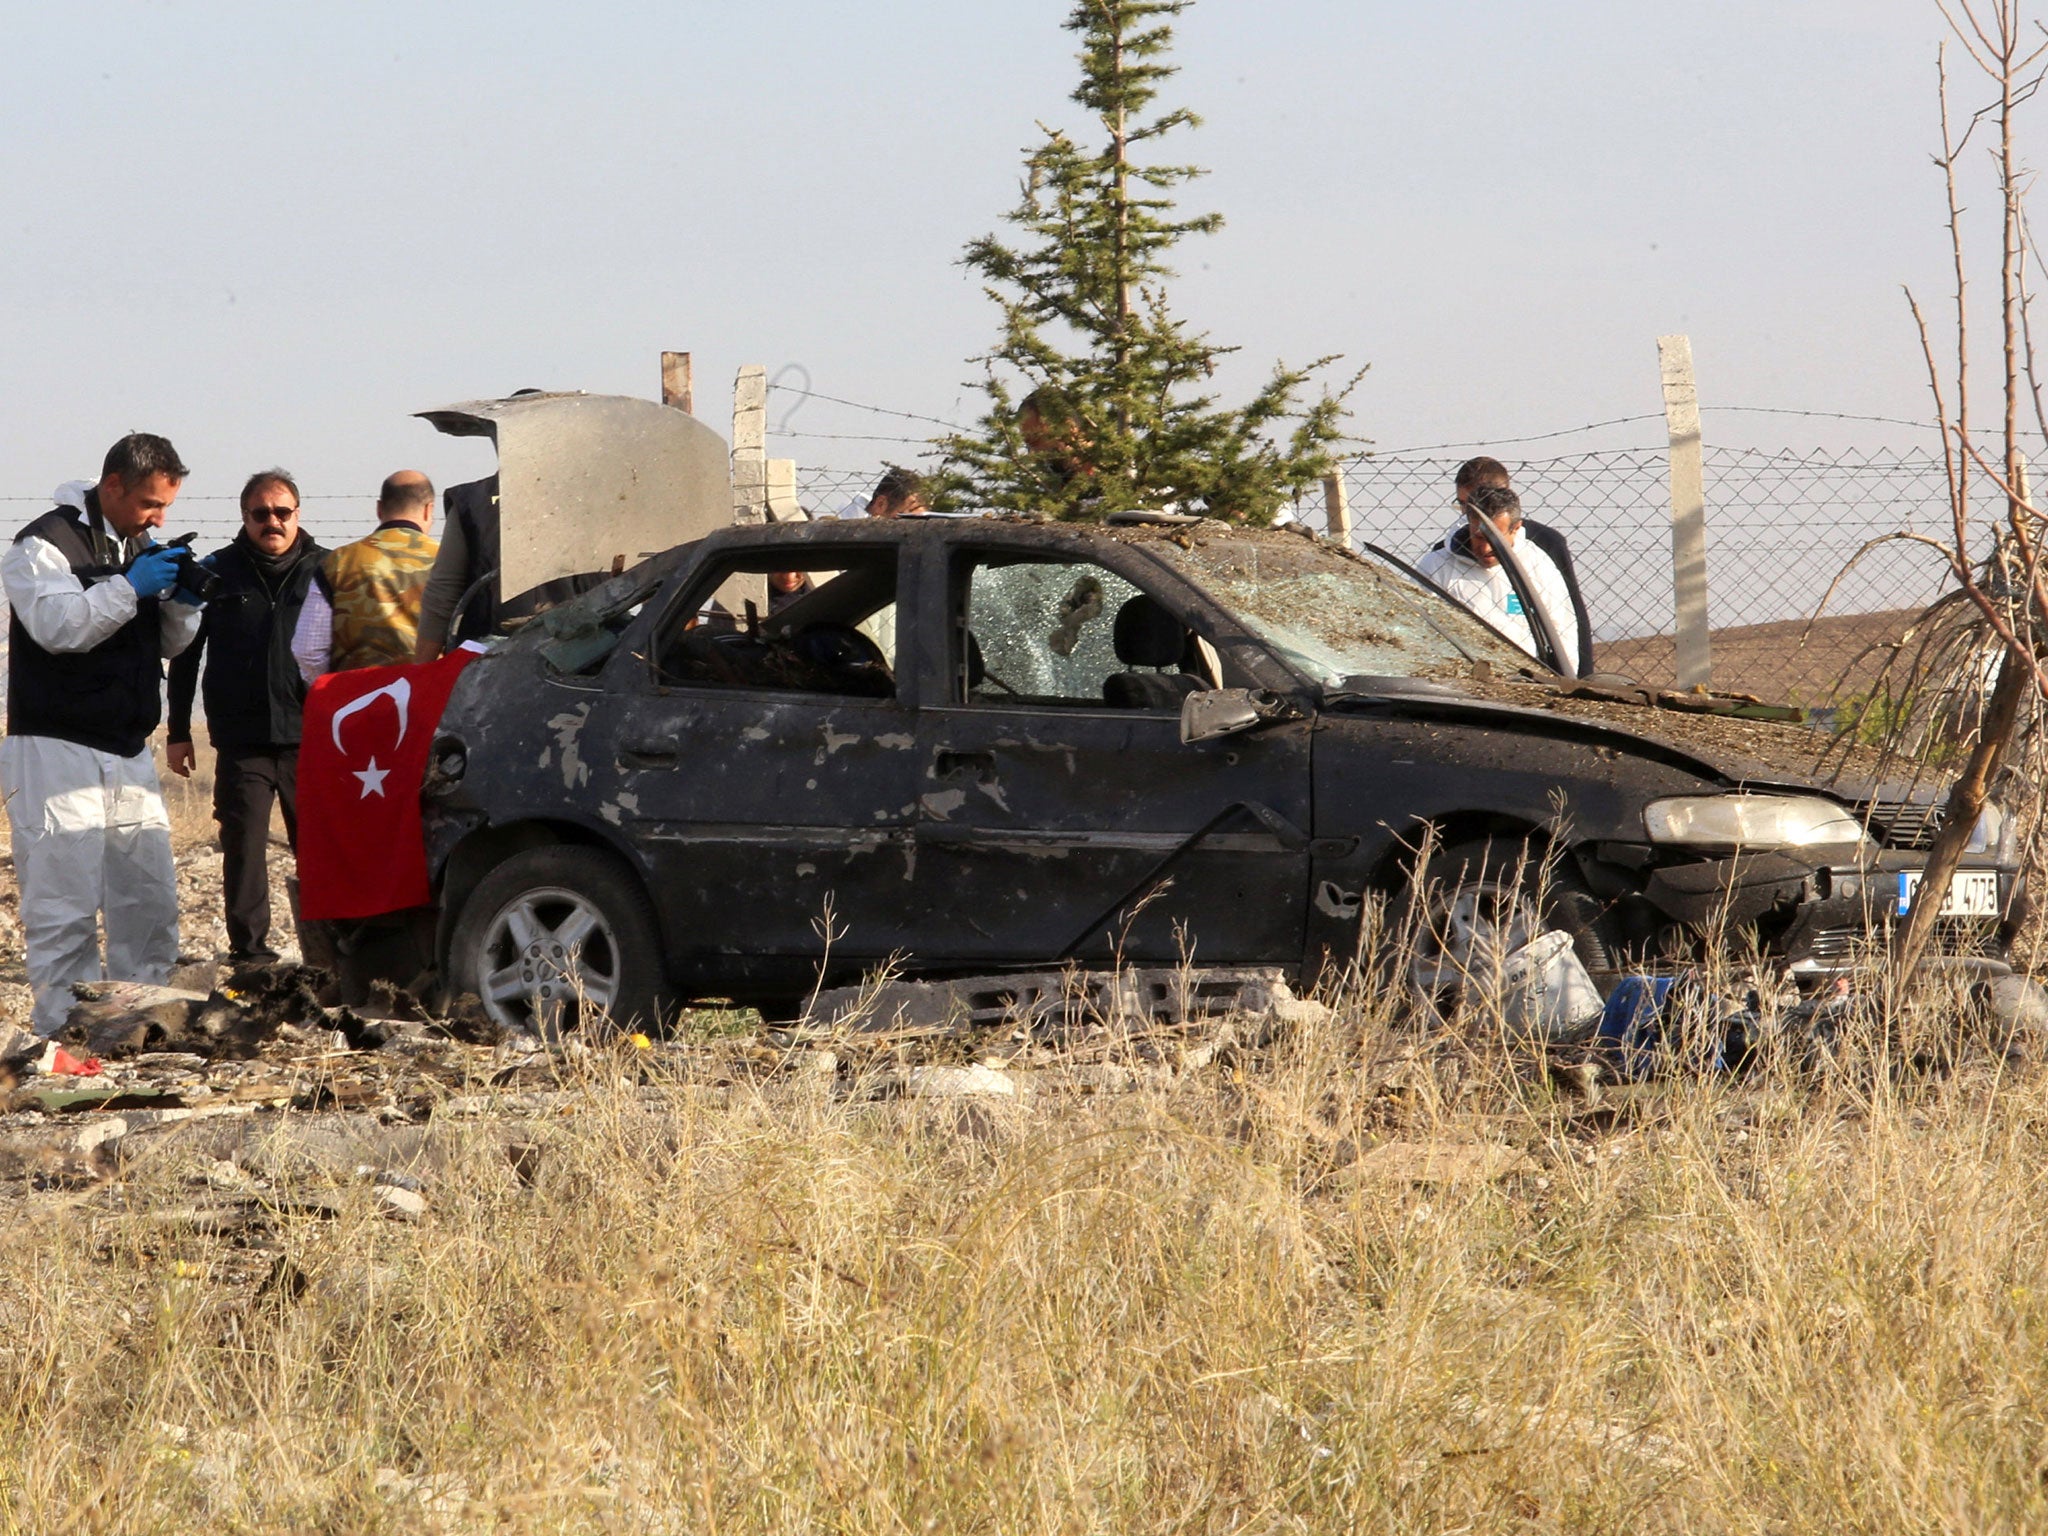 Police forensic experts examine a car after a blast detonated by two militants, in the countryside of Haymana near Ankara, Turkey, October 8, 2016.